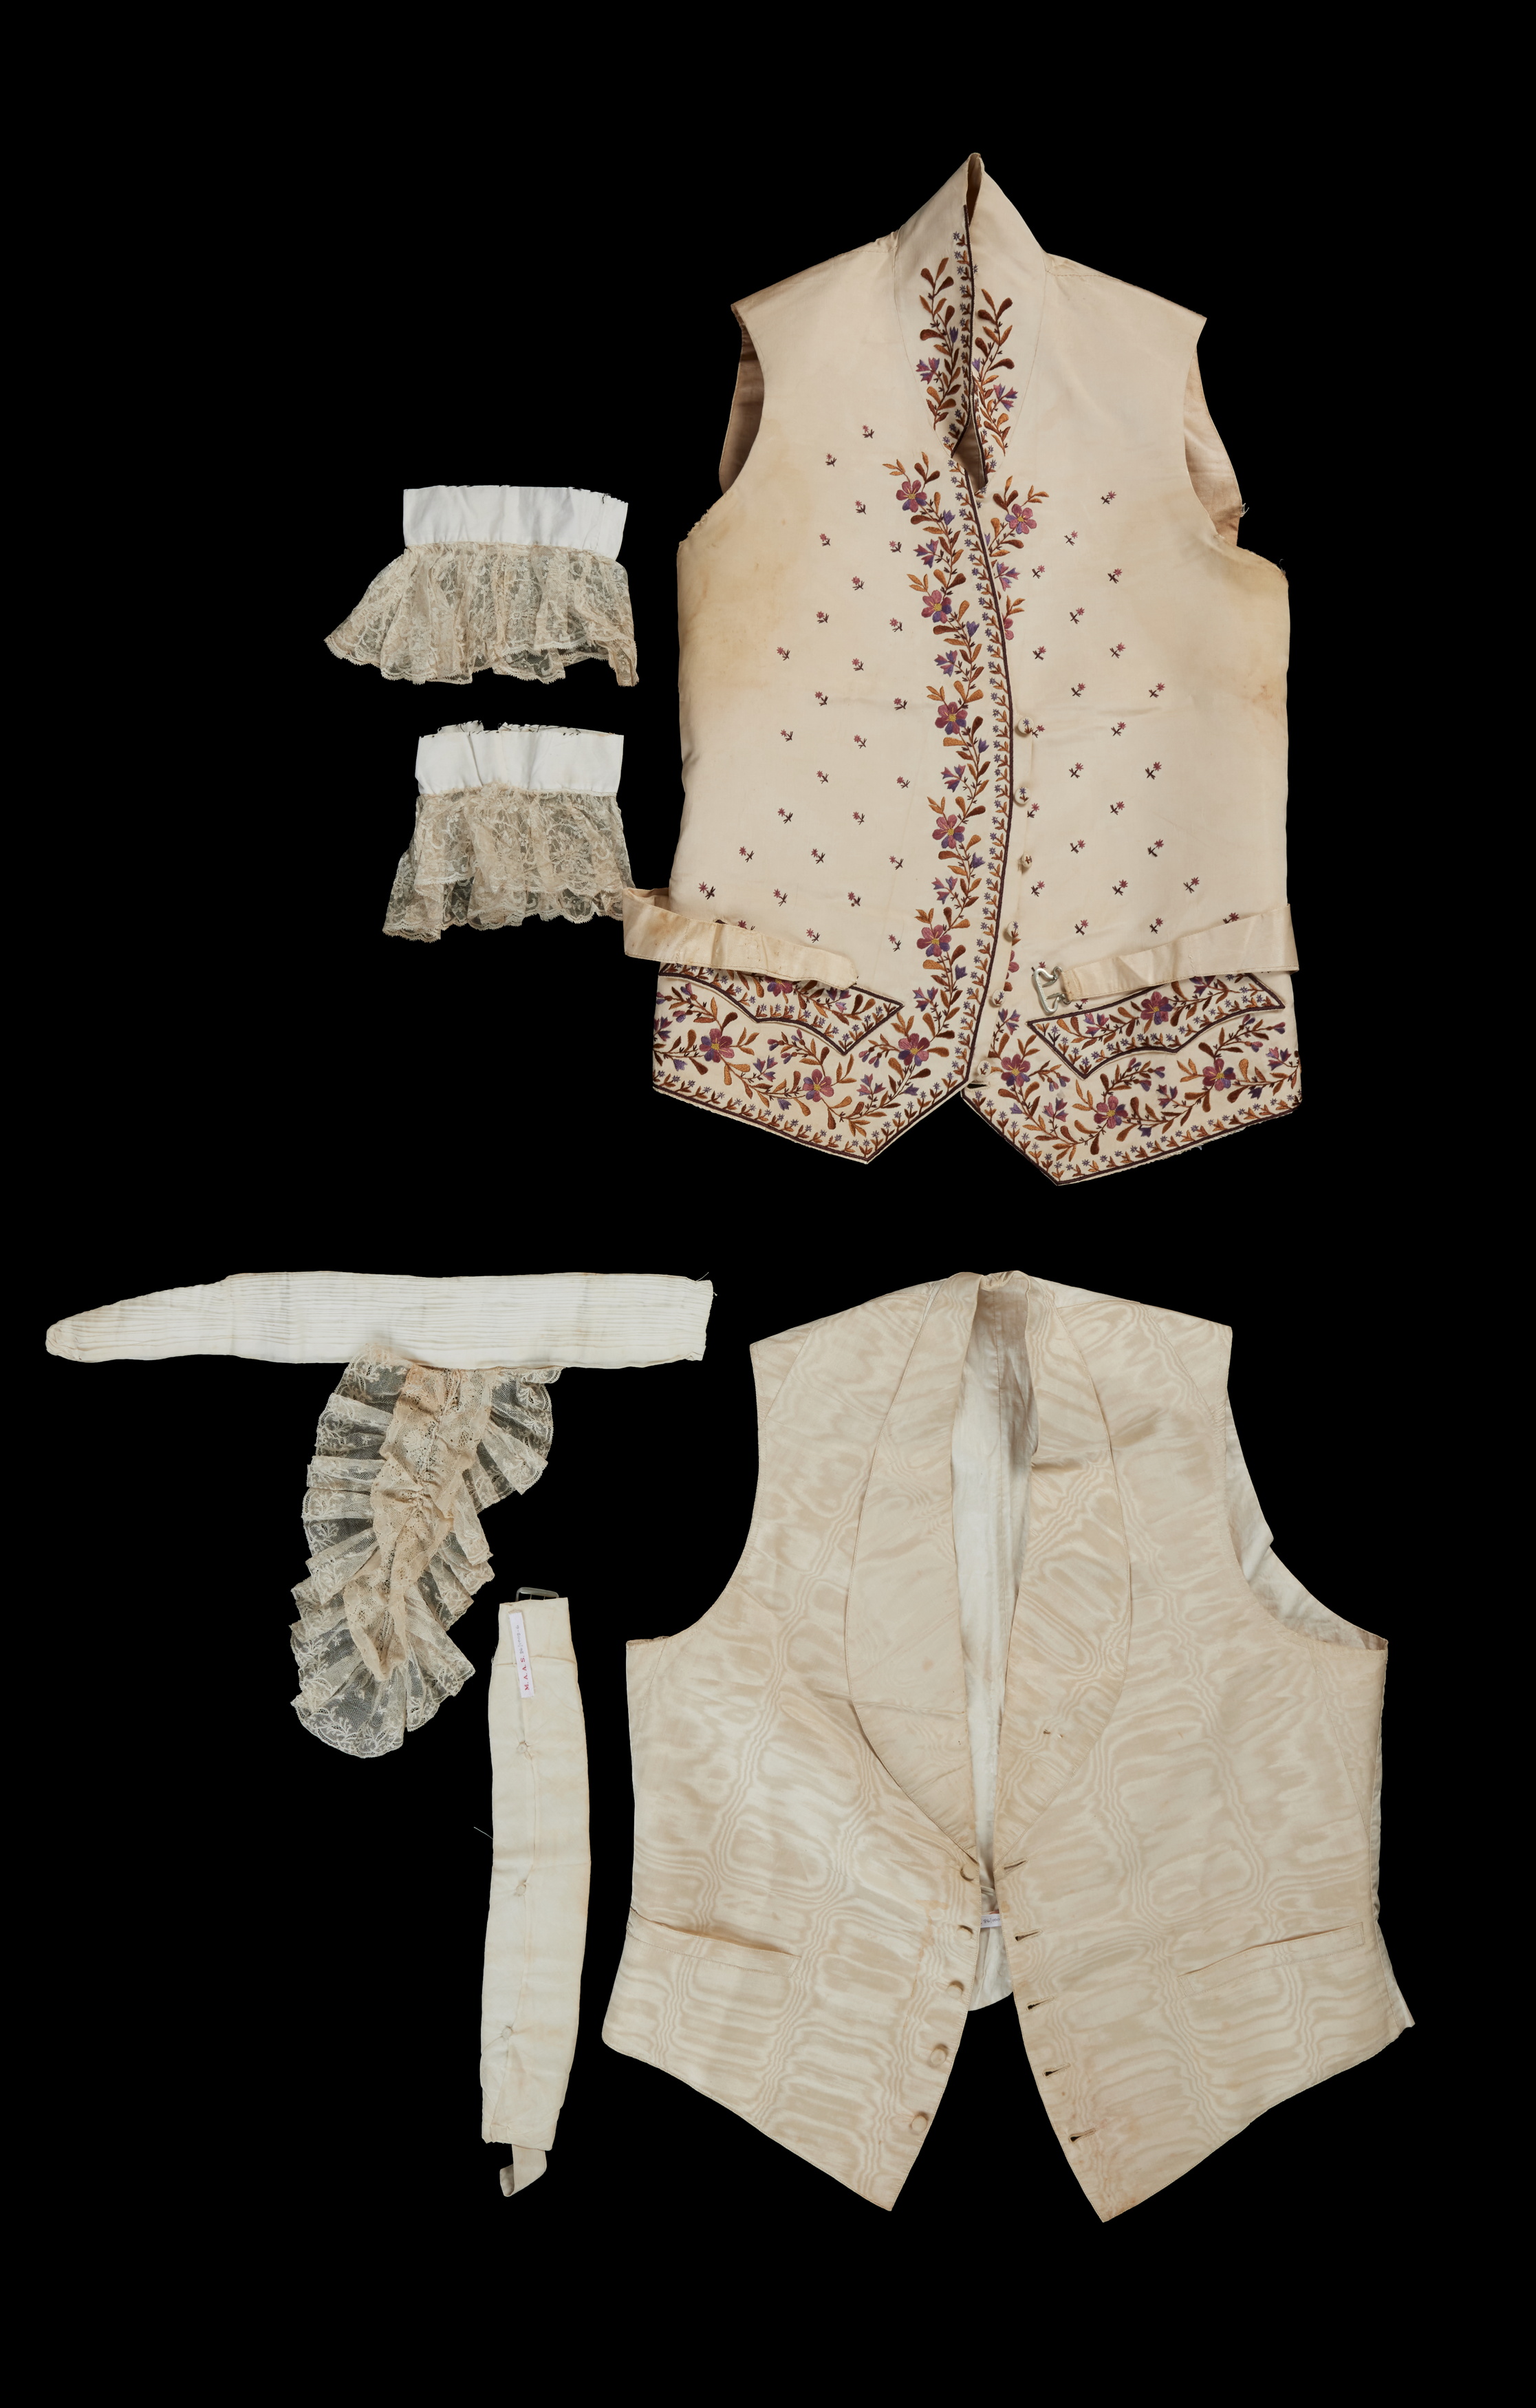 Court suit and accessories worn by Captain William Hovell